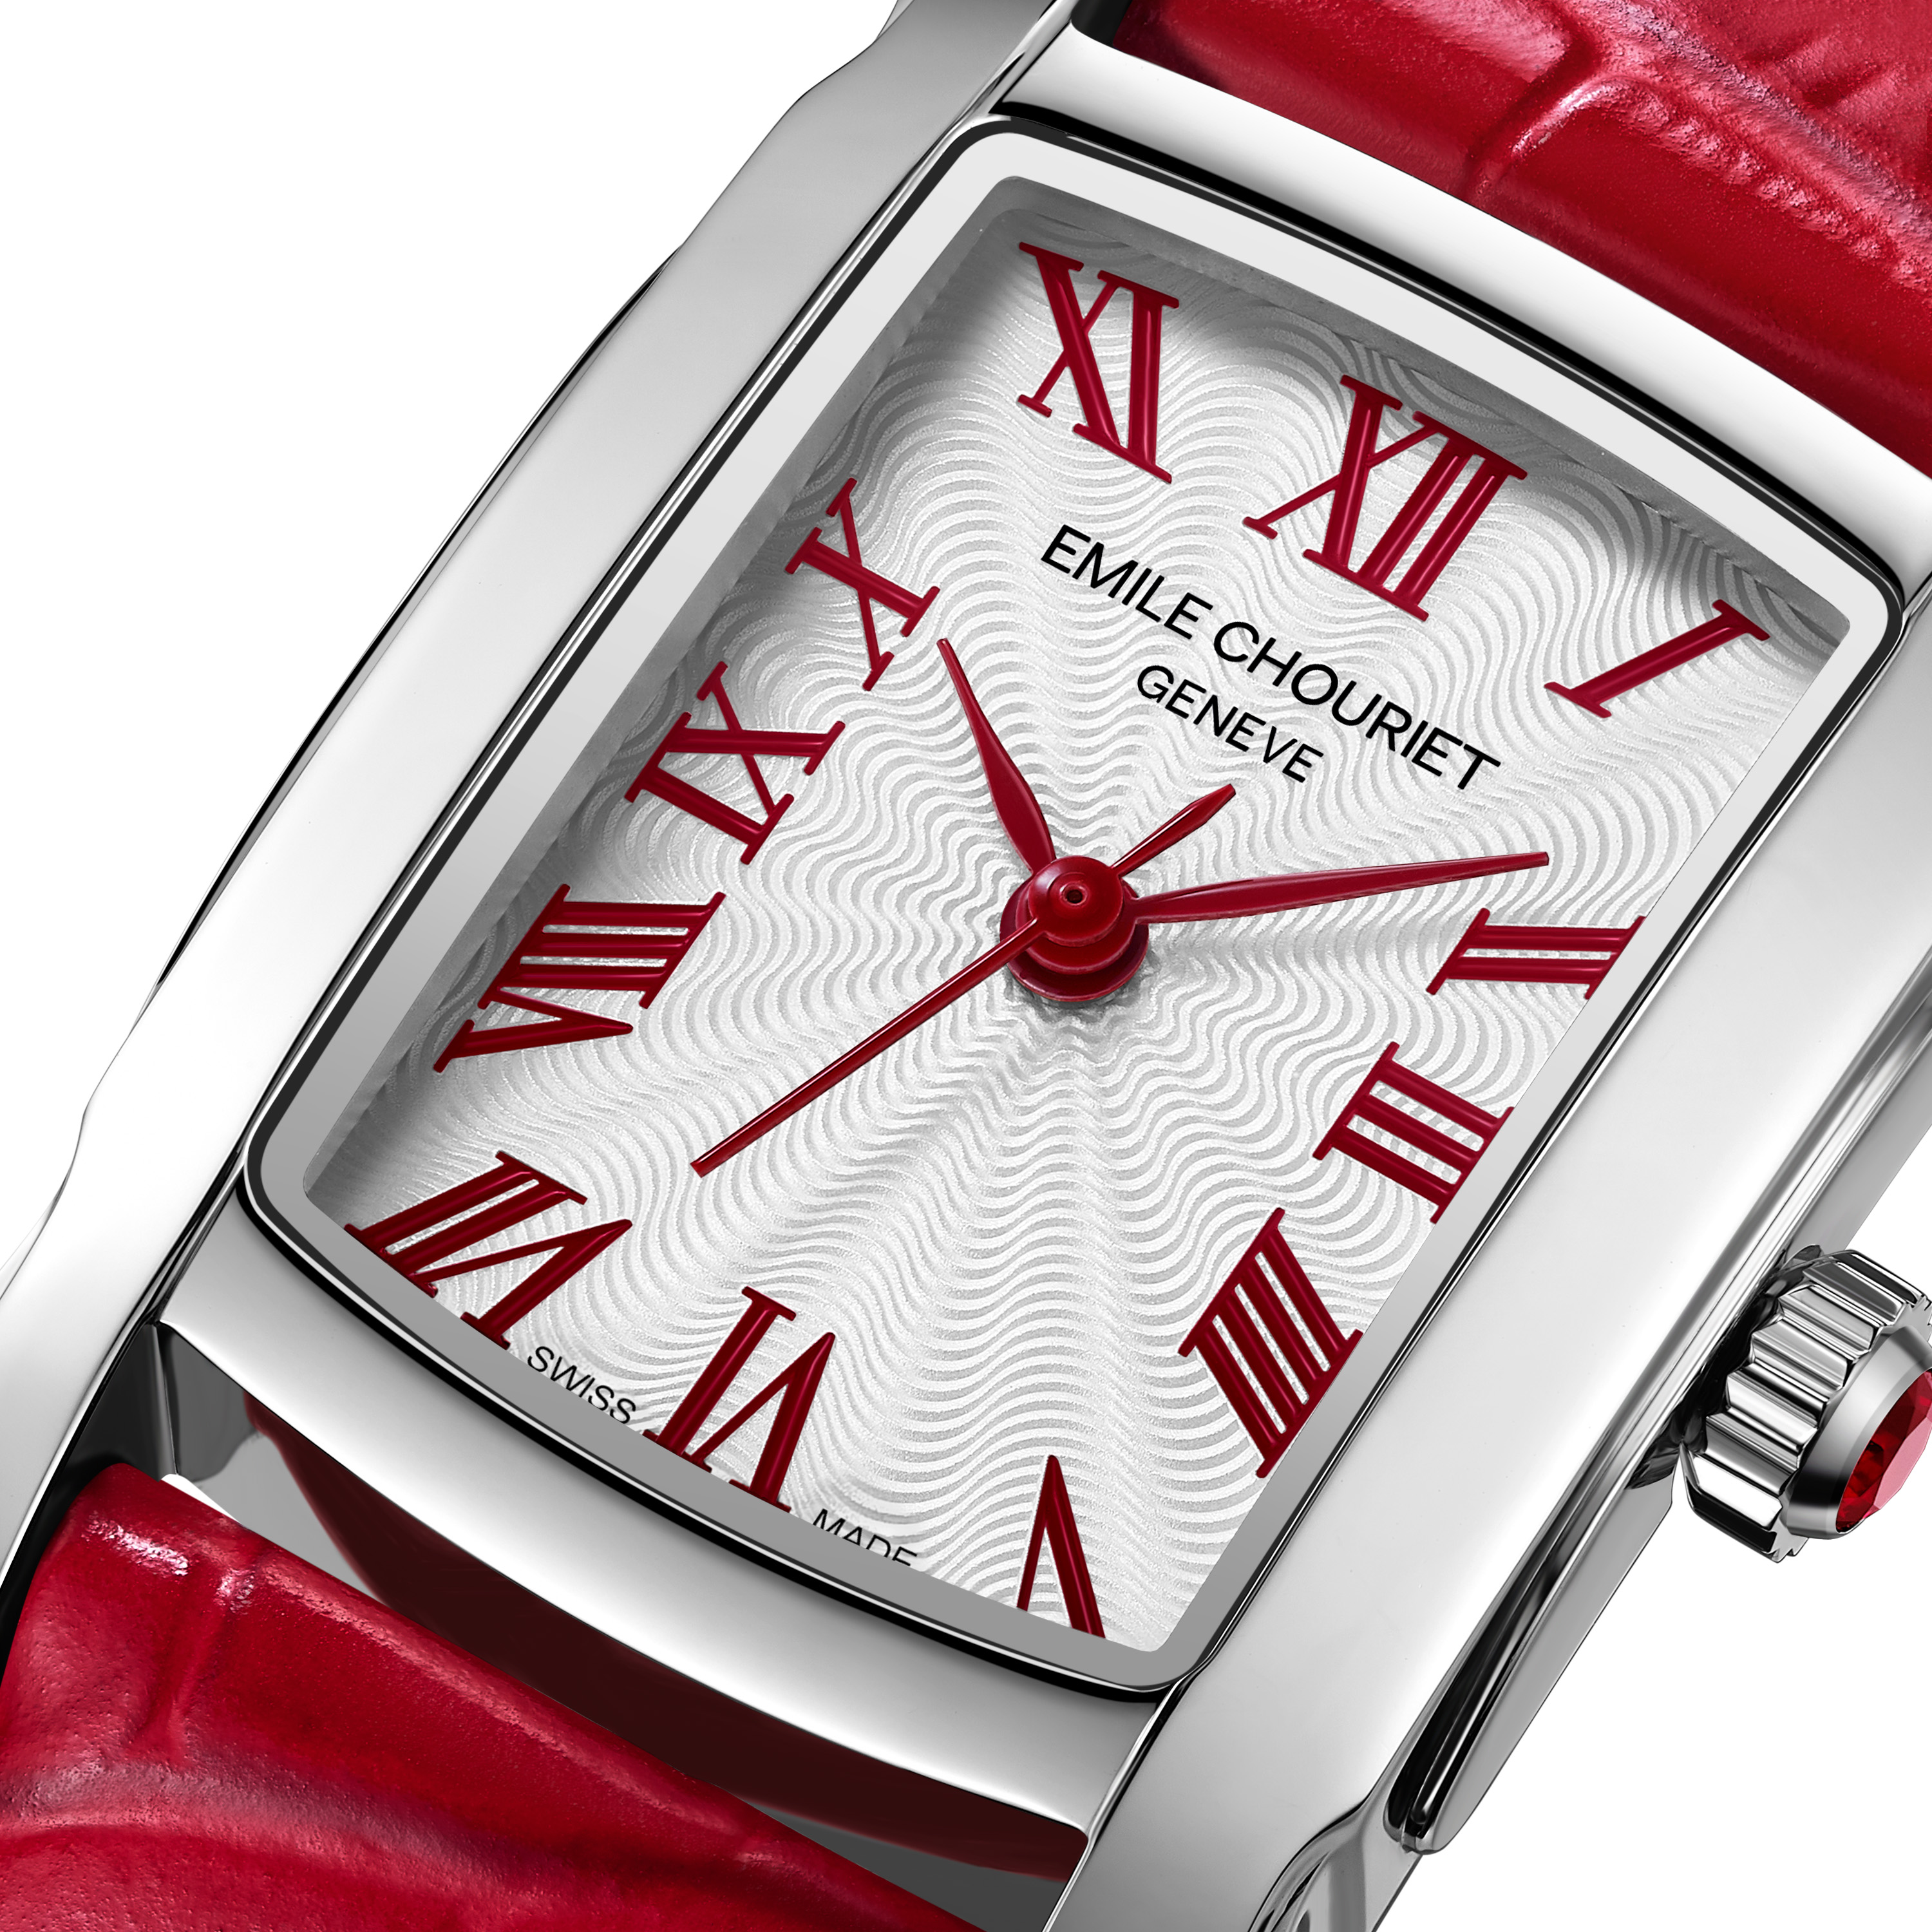 Poetic colors in Emile Chouriet's Odyssée collection of women's watches   